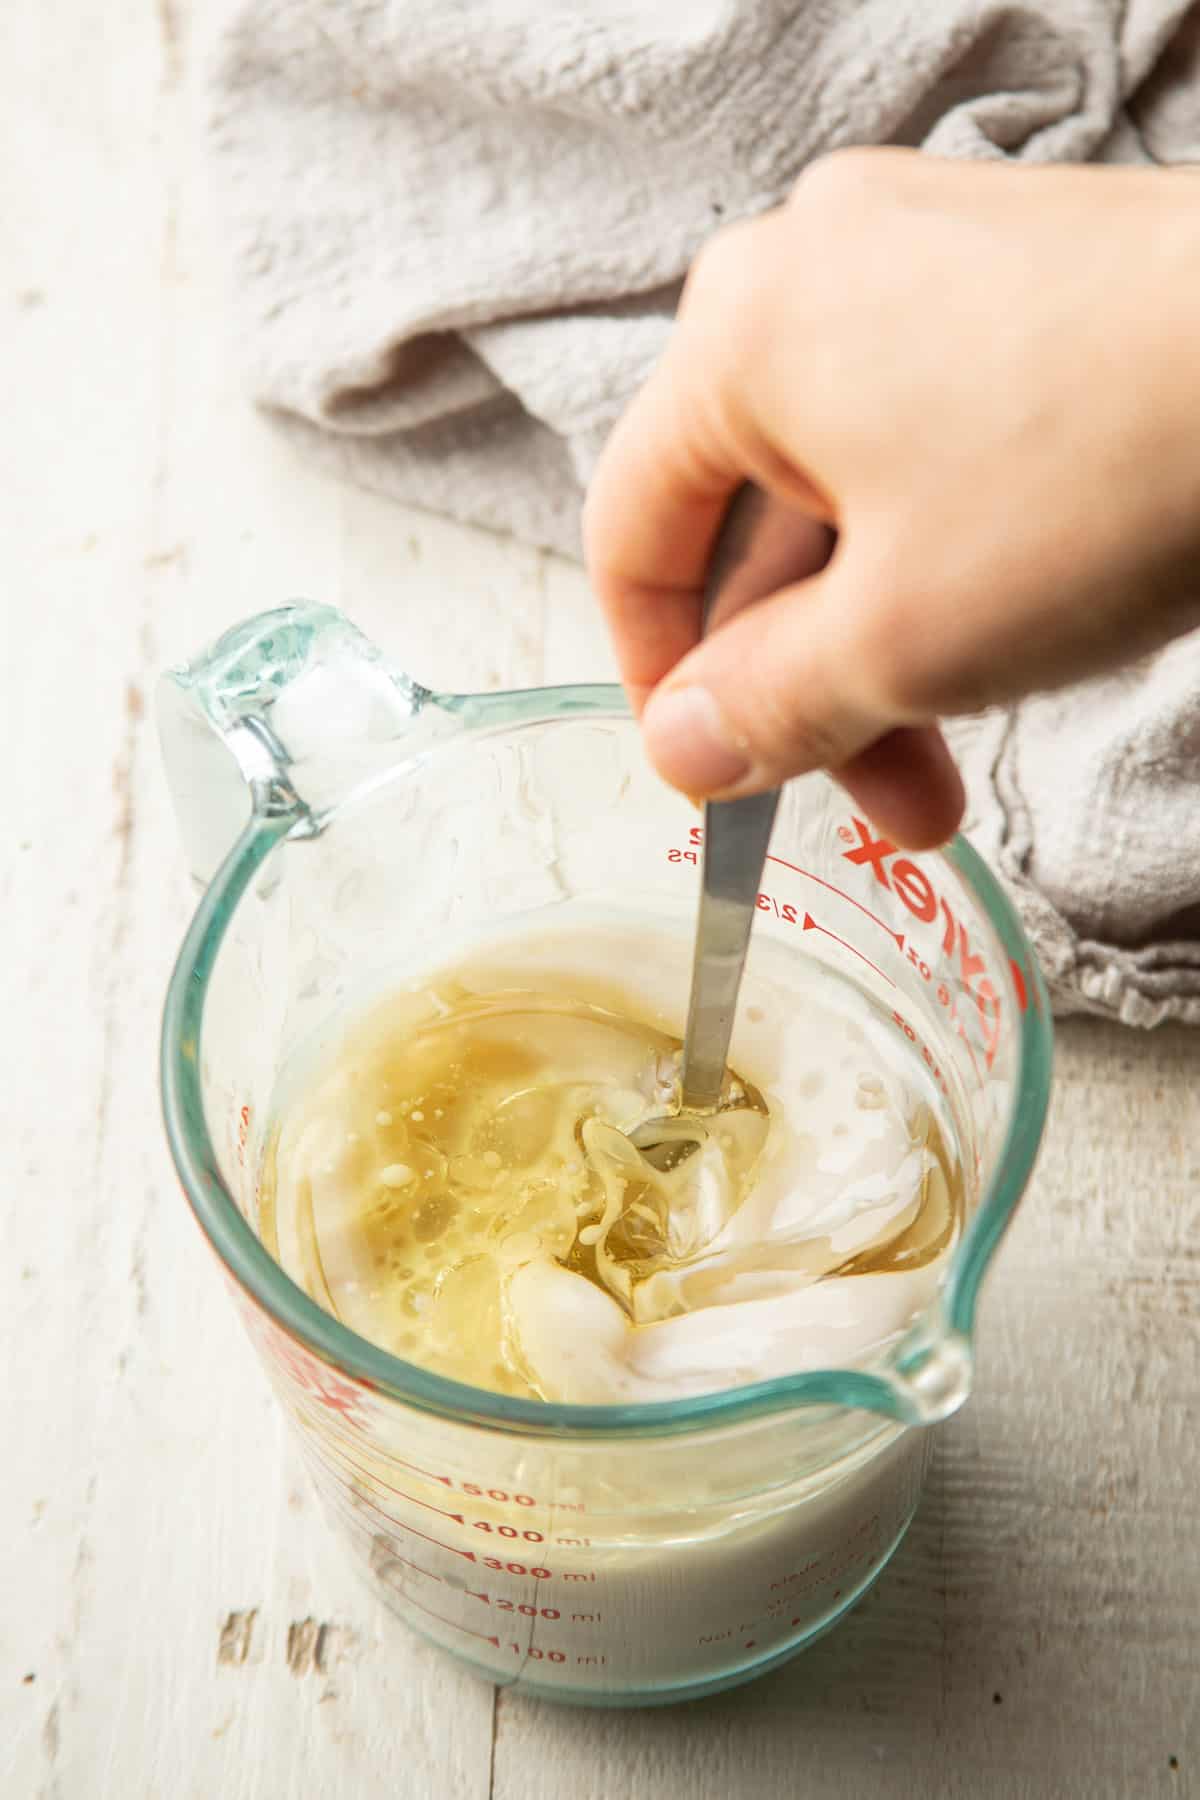 Hand stirring oil into a measuring cup filled with non-dairy milk.